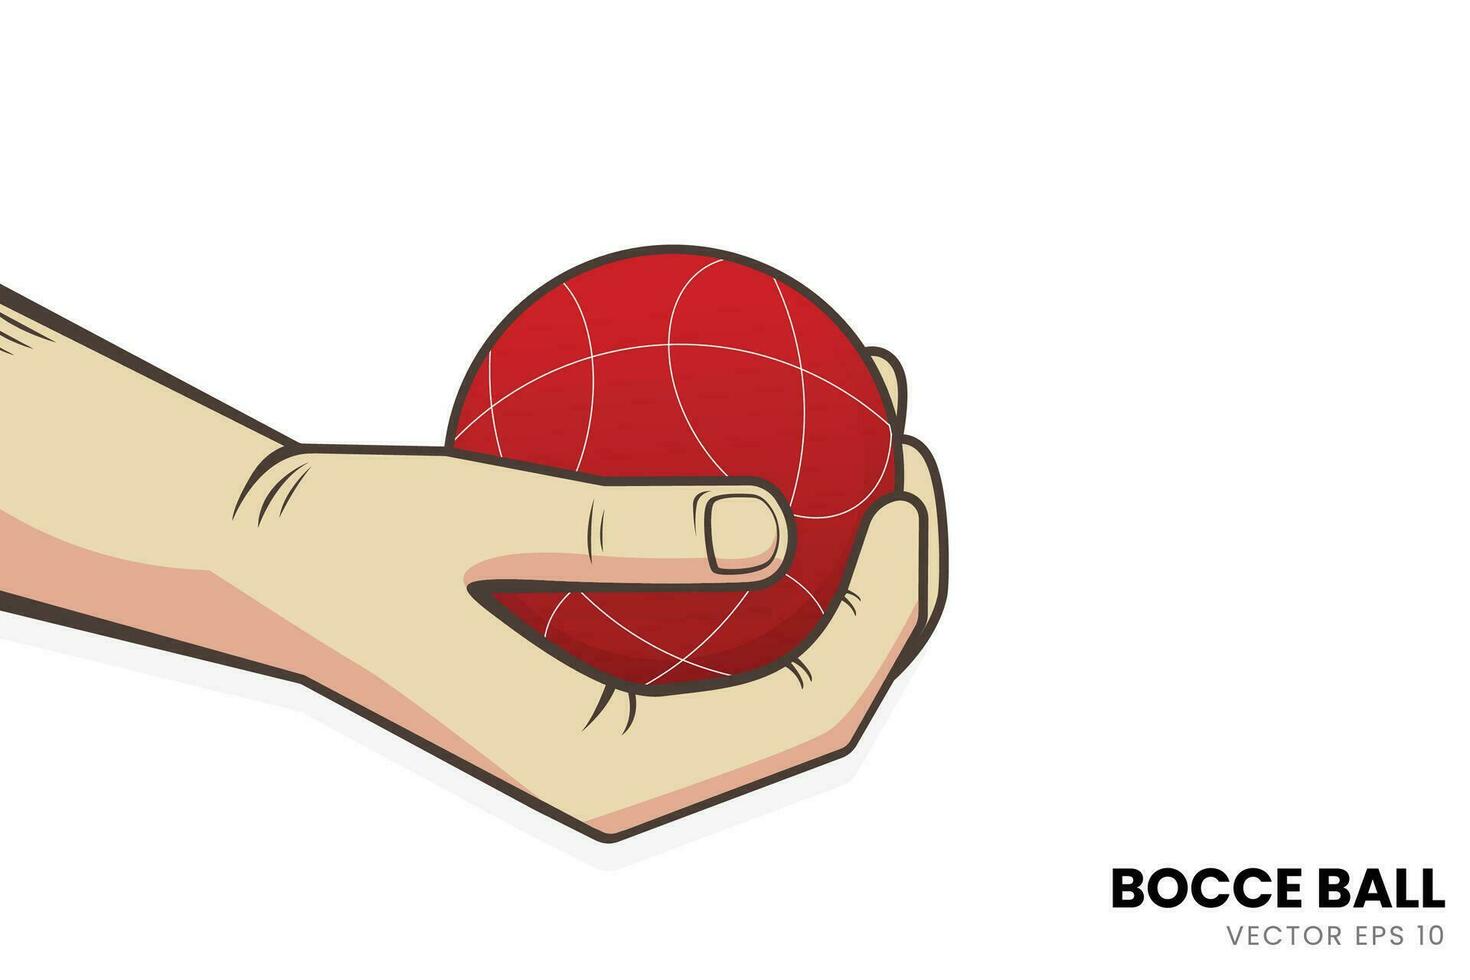 Illustration of the technique of gripping the Bocce Ball. Perfect for added images with a Bocce sports theme. vector